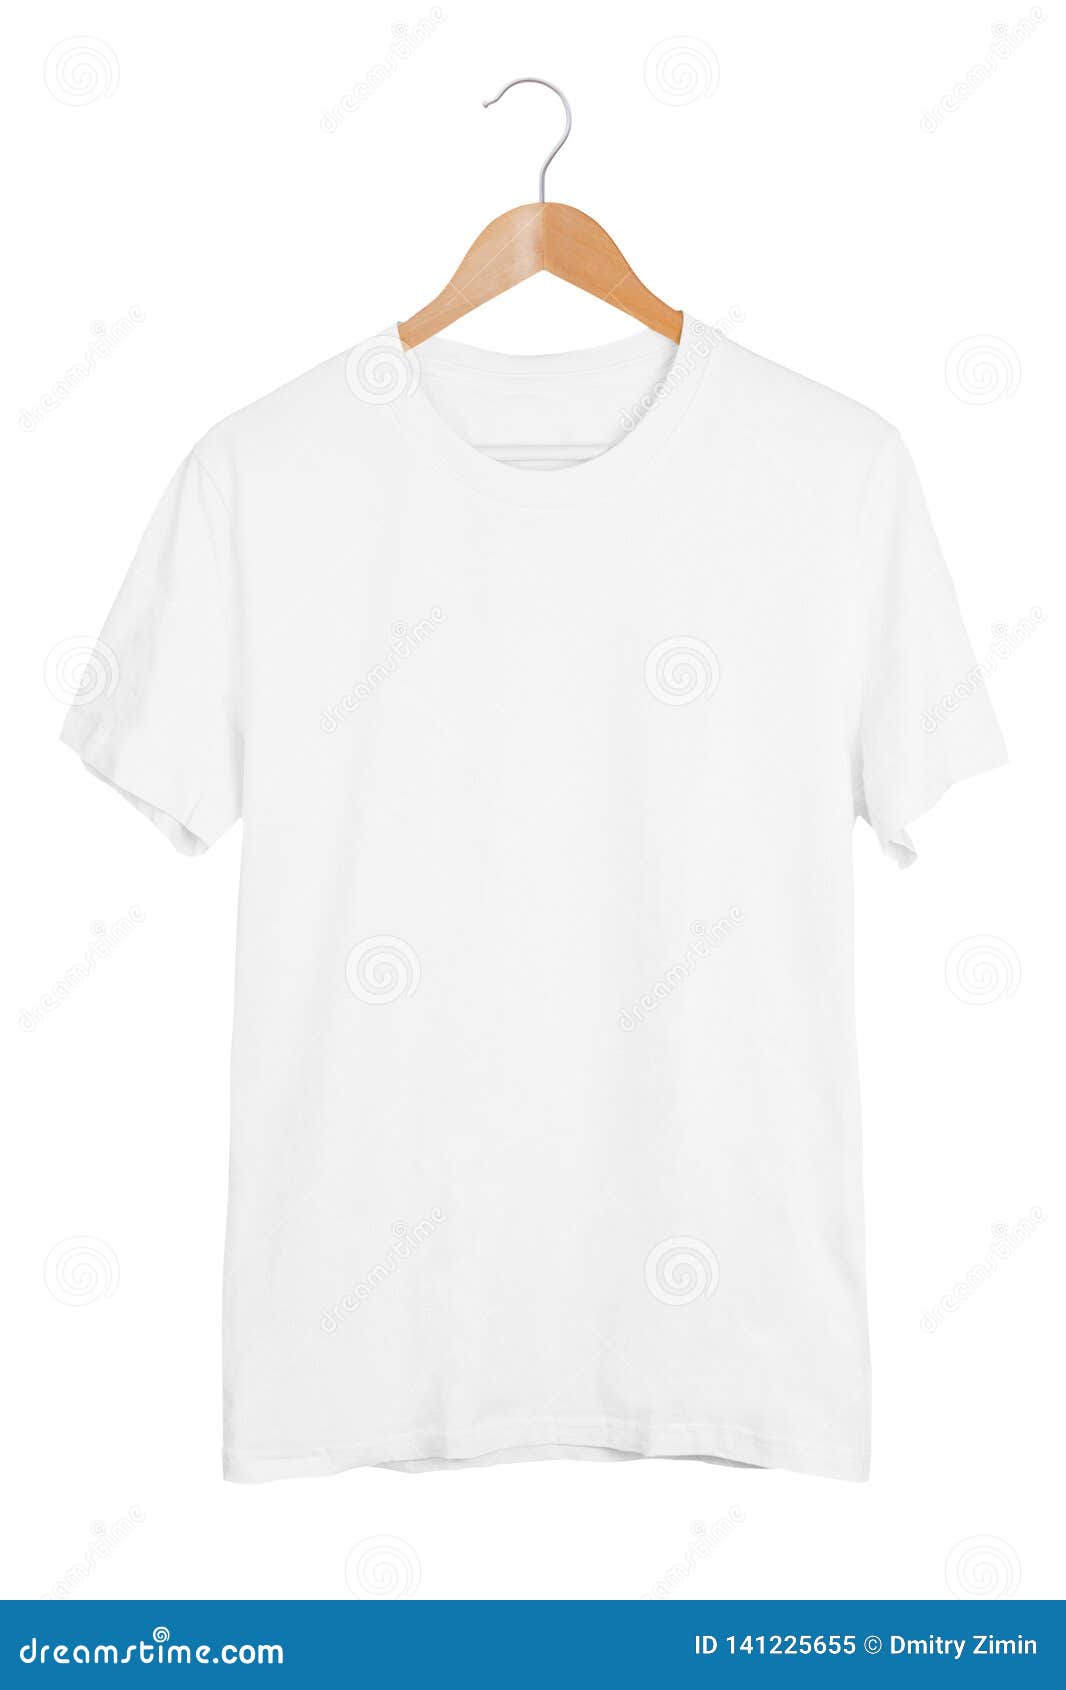 Download Blank White T-shirt On Wooden Hanger Isolated On White ...